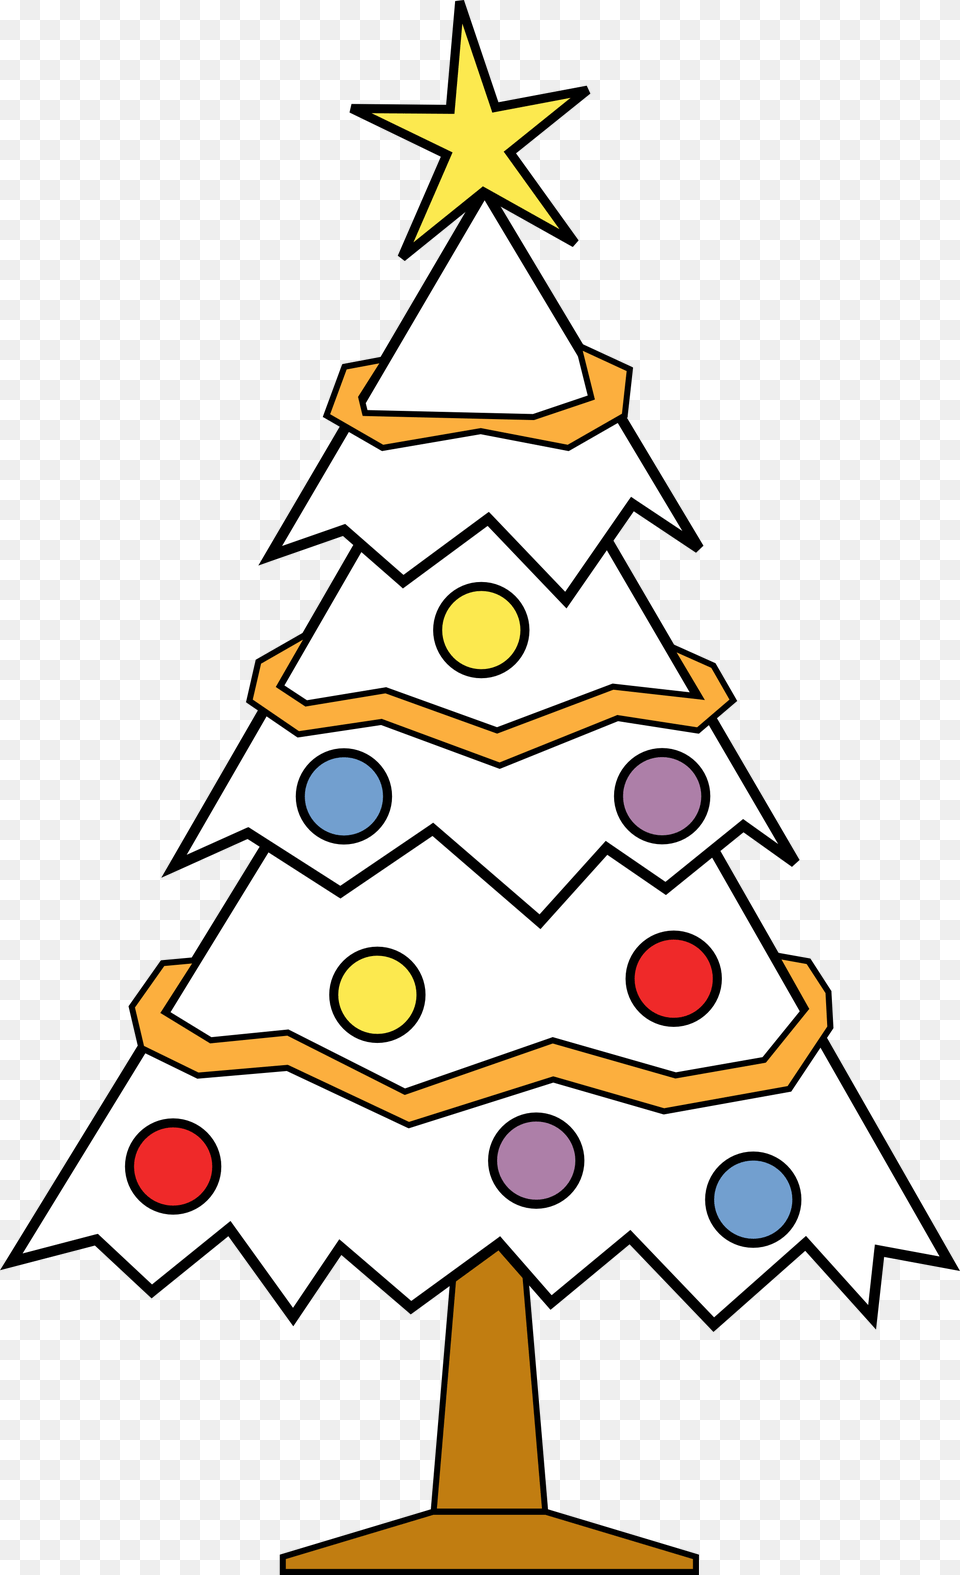 Black And White Christmas Tree Freeuse Download, Christmas Decorations, Festival, Star Symbol, Symbol Free Png